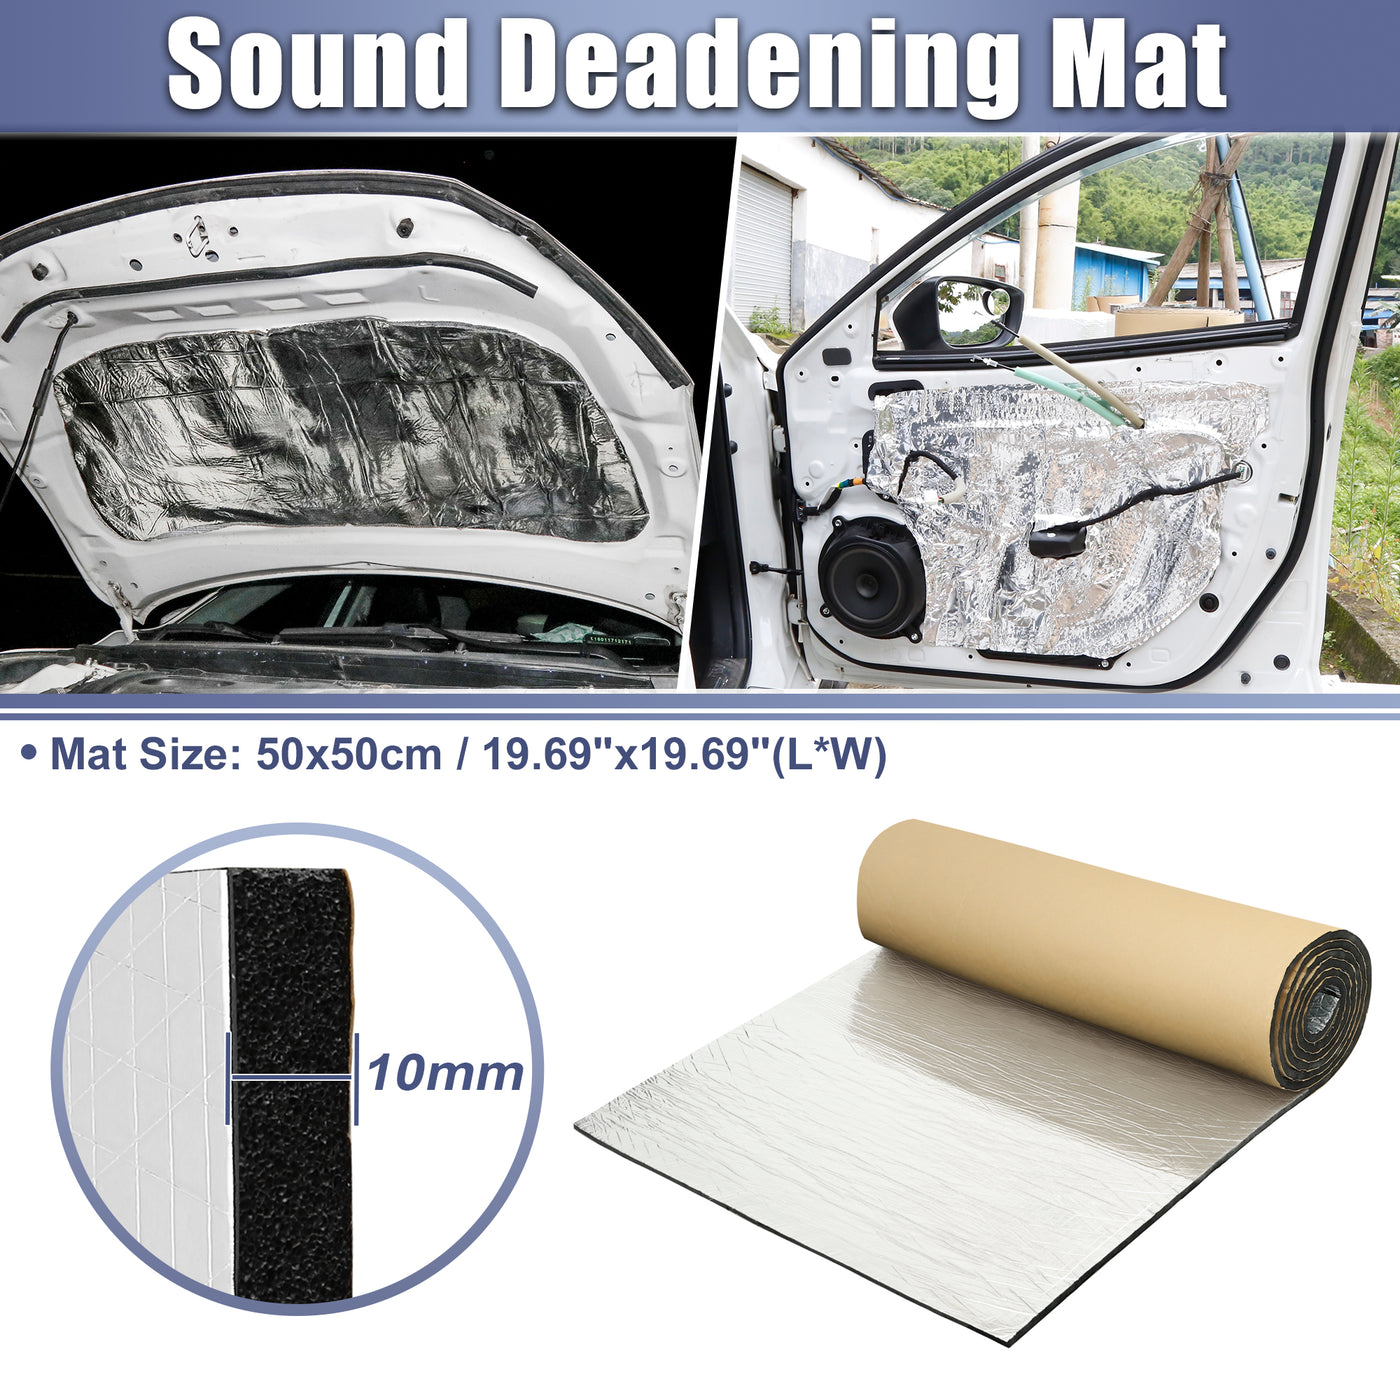 X AUTOHAUX 394mil 10mm 2.69sqft Car Sound Deadening Mat Aluminum Foil Closed Cell Foam Heat Shield Material Damping Self Adhesive Universal for Hood Fender and Boat Engine Cover 19.69"x19.69"